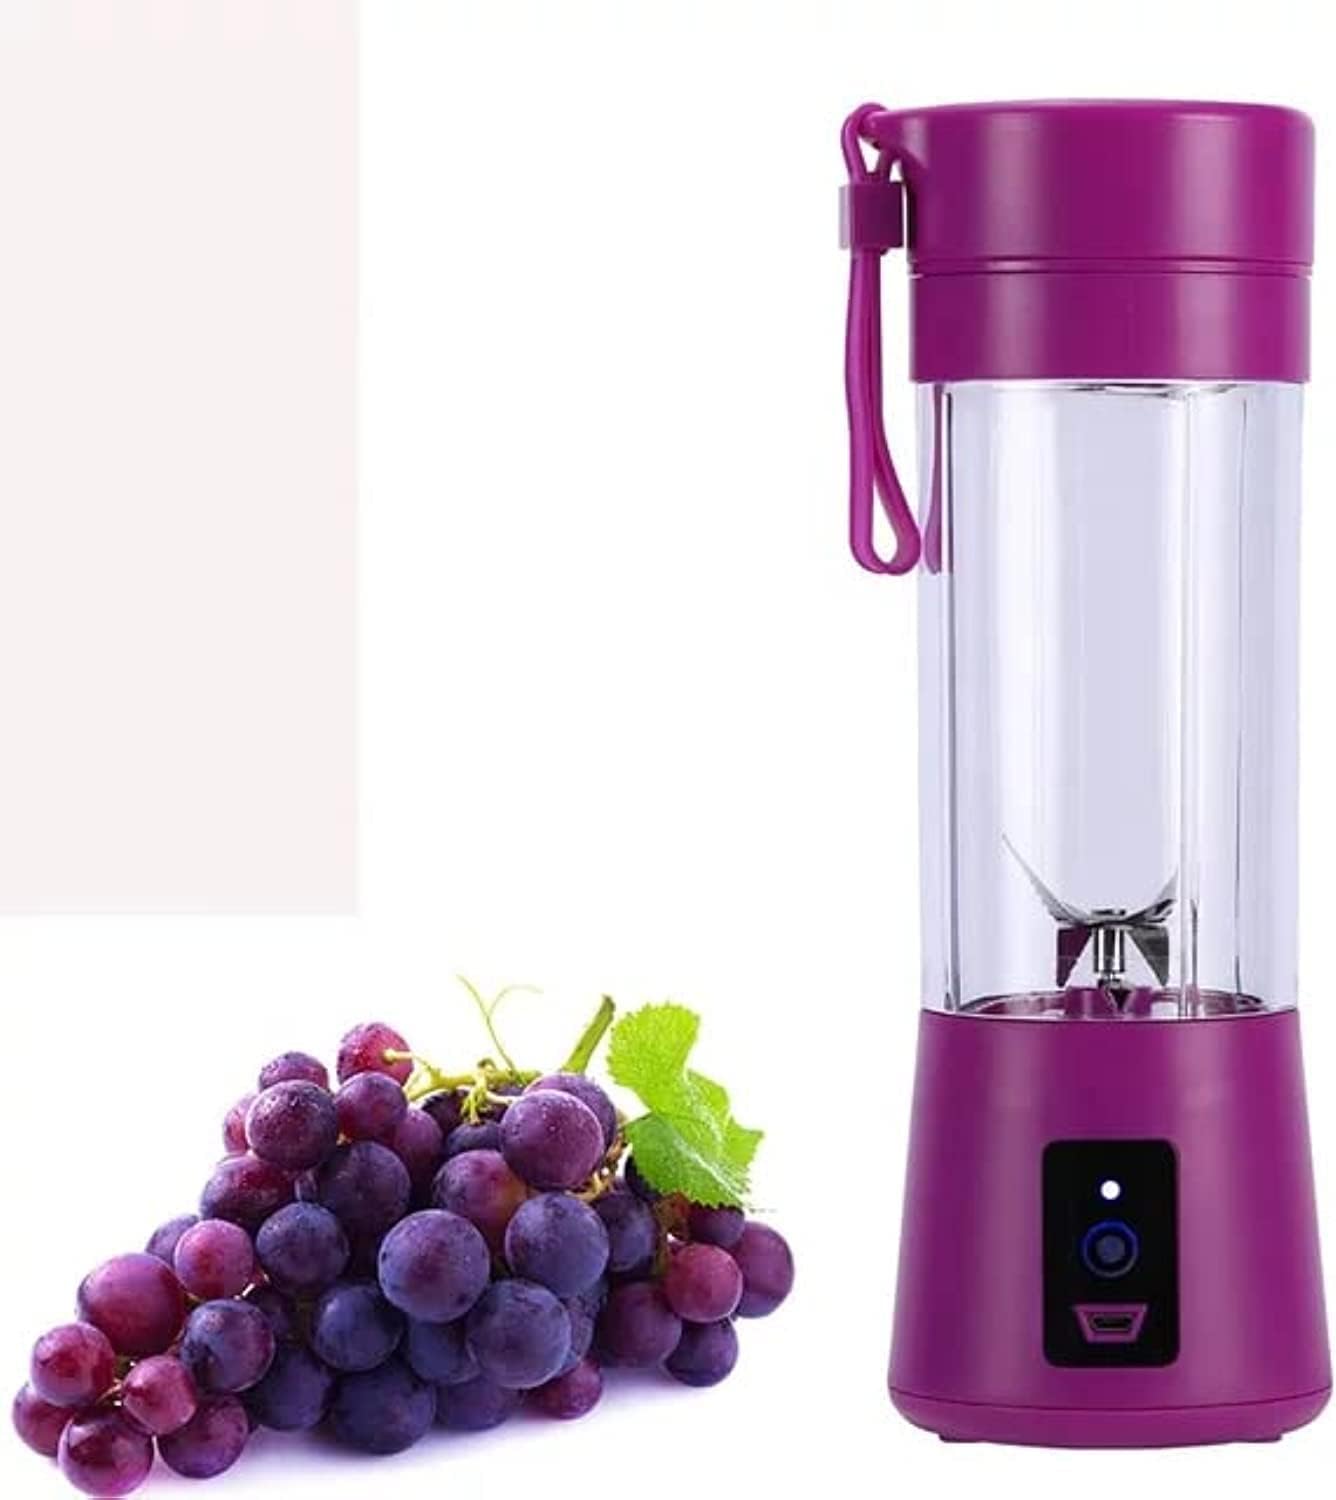 Portable Juicer Blender Household Fruit Mixer 4 Blades in 380 ml Fruit Mixing Machine with USB Charger Cable for Superb Mixing USB Juicer Cup